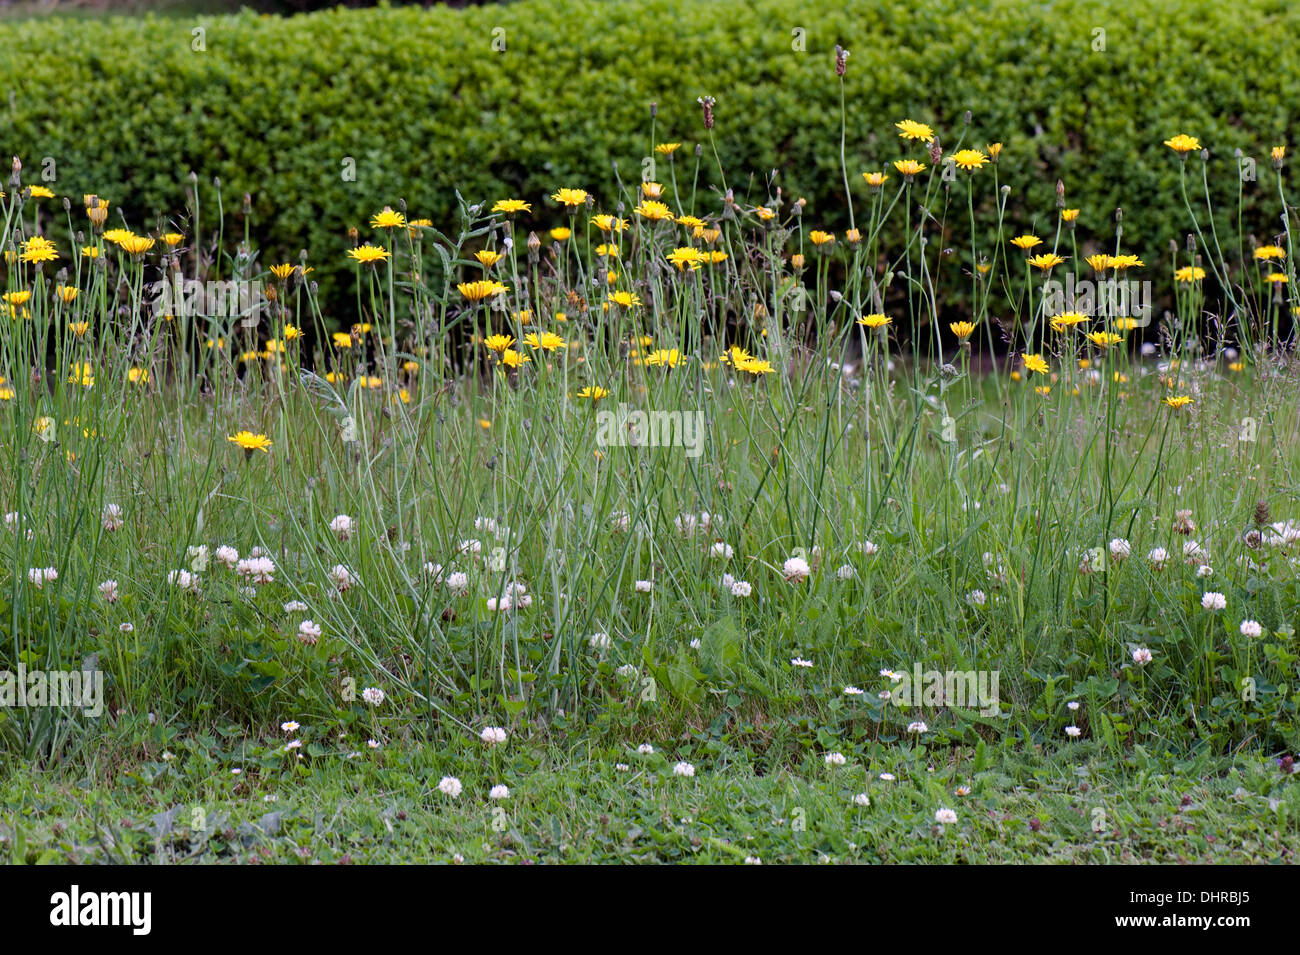 Wild garden flowers to attract invertebrates and encourage natural biological control Stock Photo